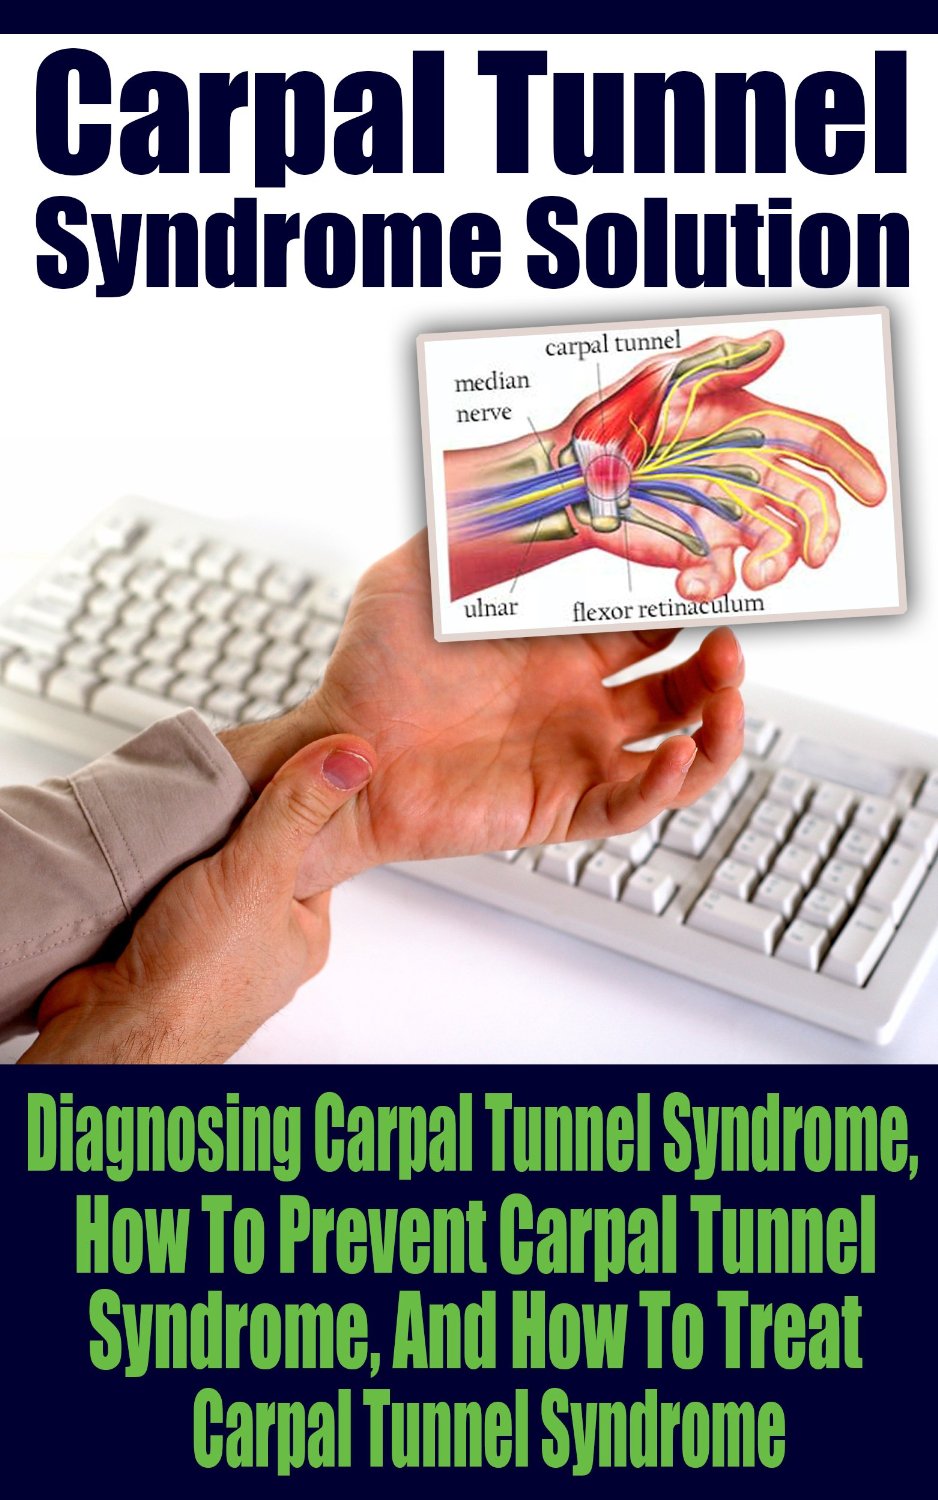 Carpal Tunnel Syndrome Solution by Ace McCloud